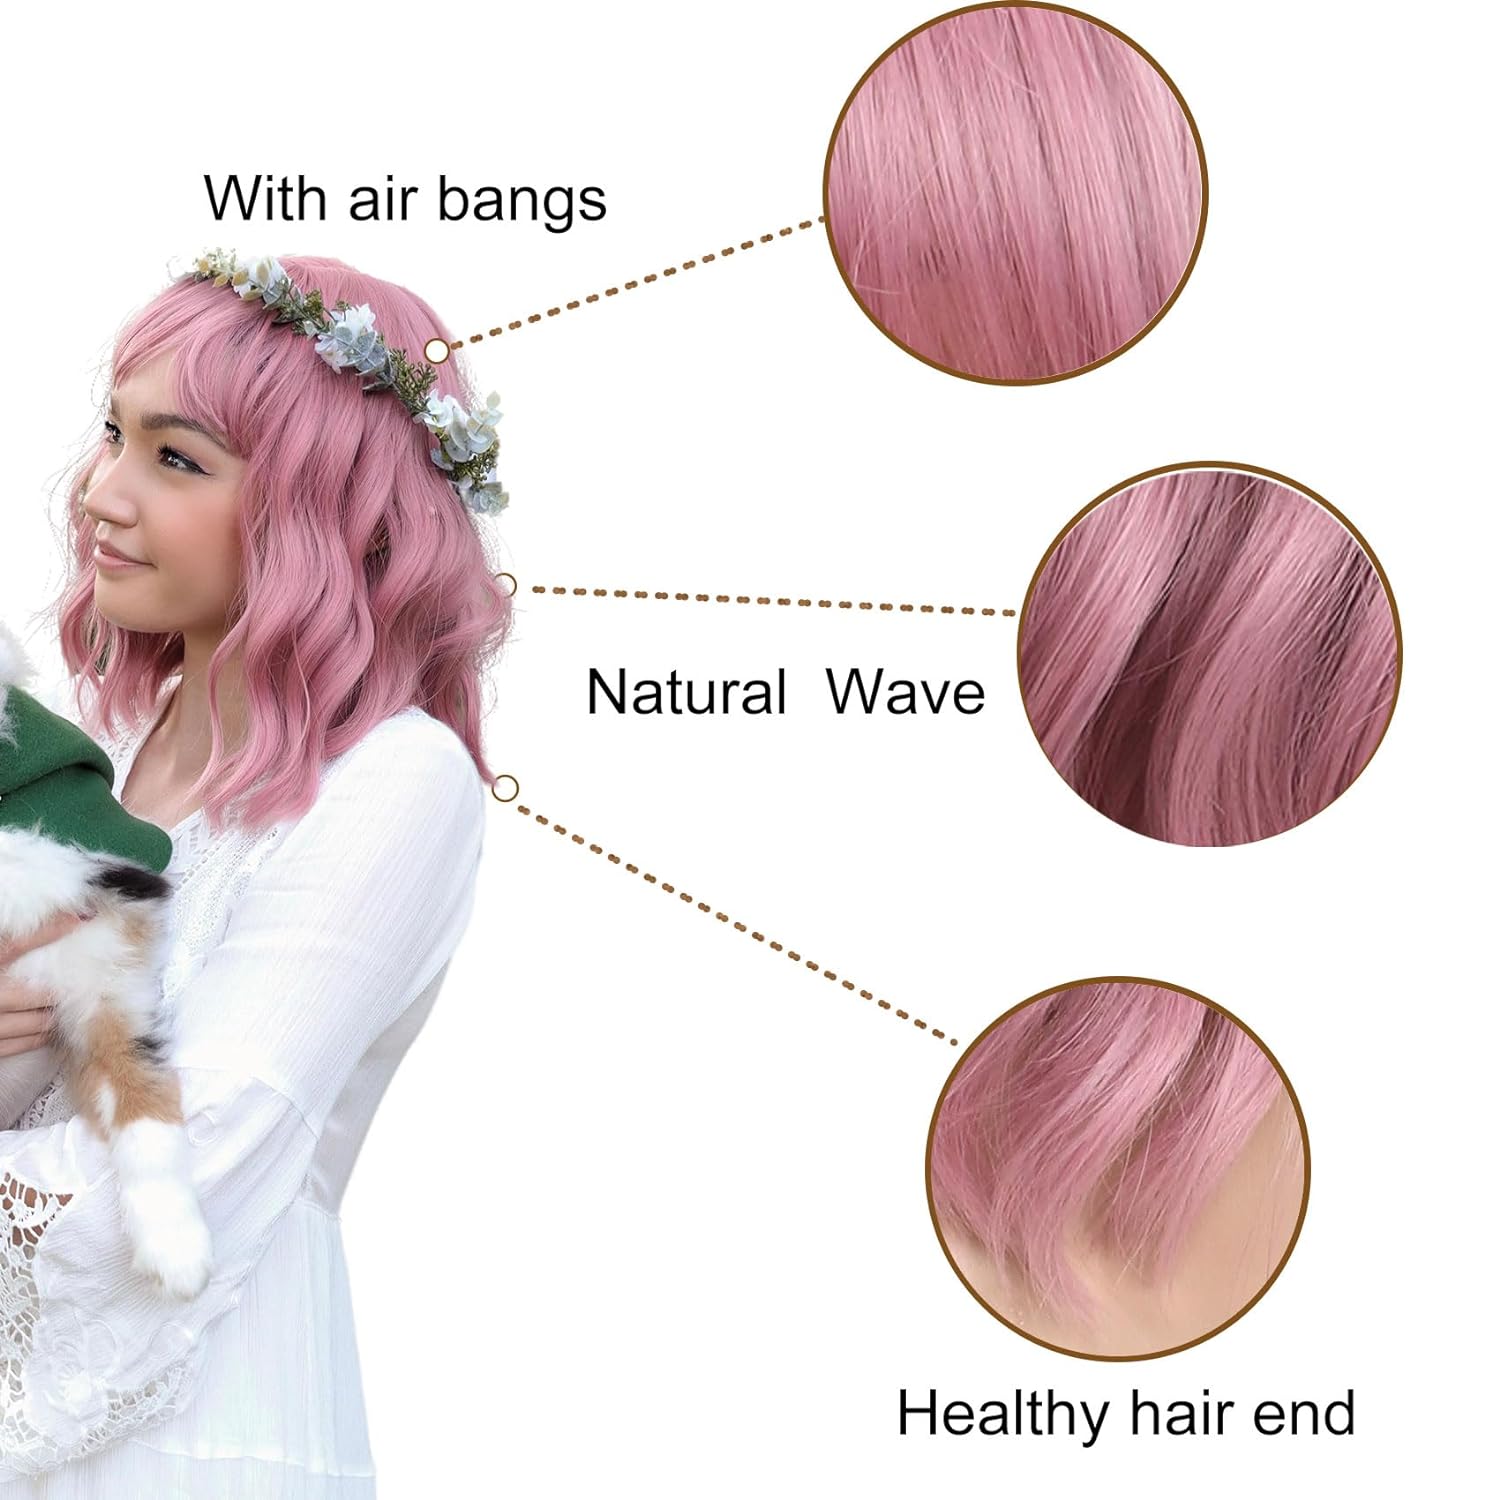 Vibrant Pastel Wig for Fun and Playful Styles